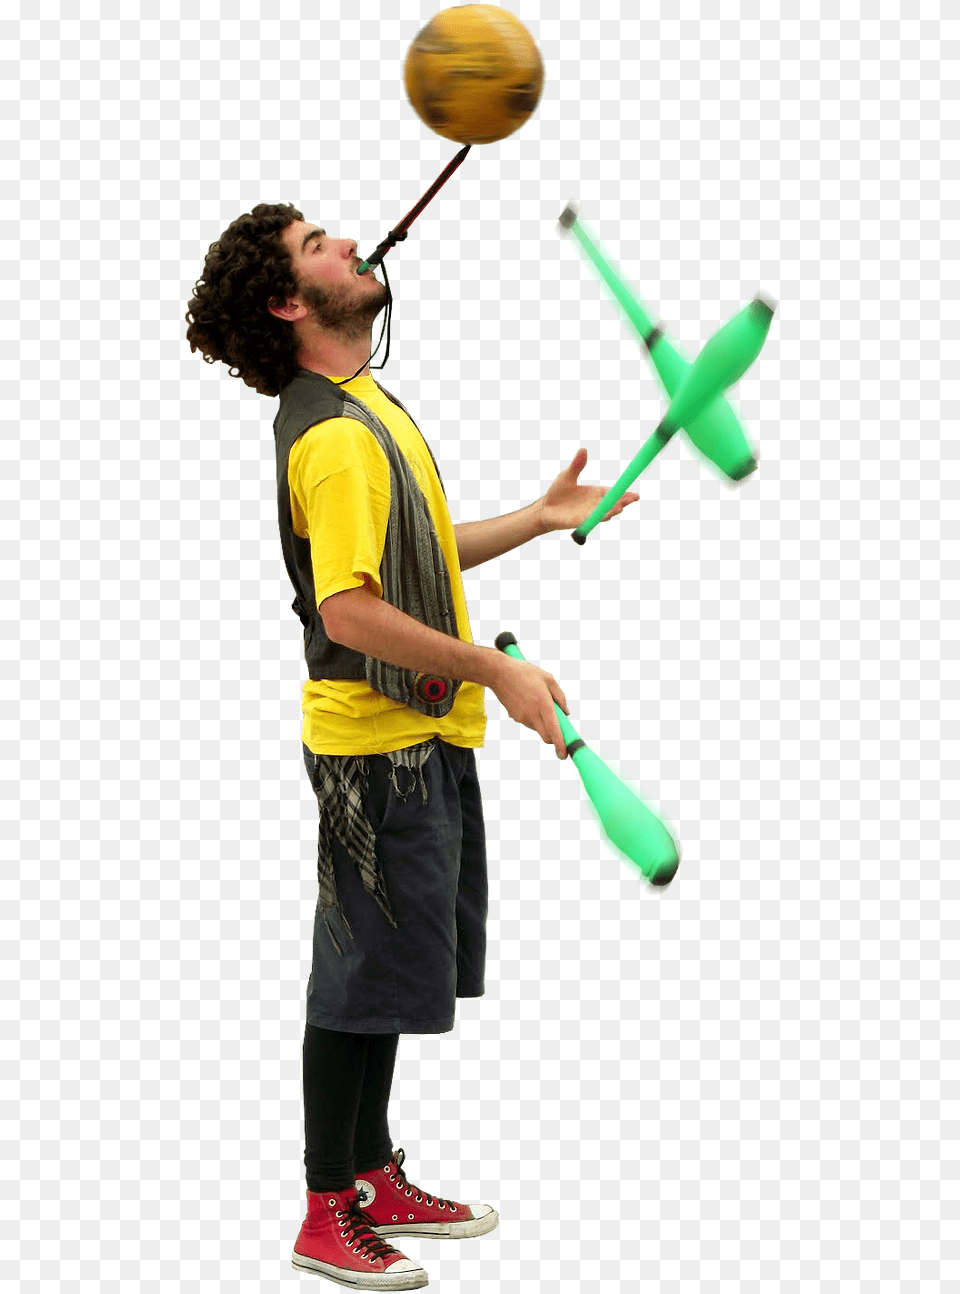 Th Malabares 93darquitectos Mx Personas Malabares, Juggling, Person, Male, Man Png Image